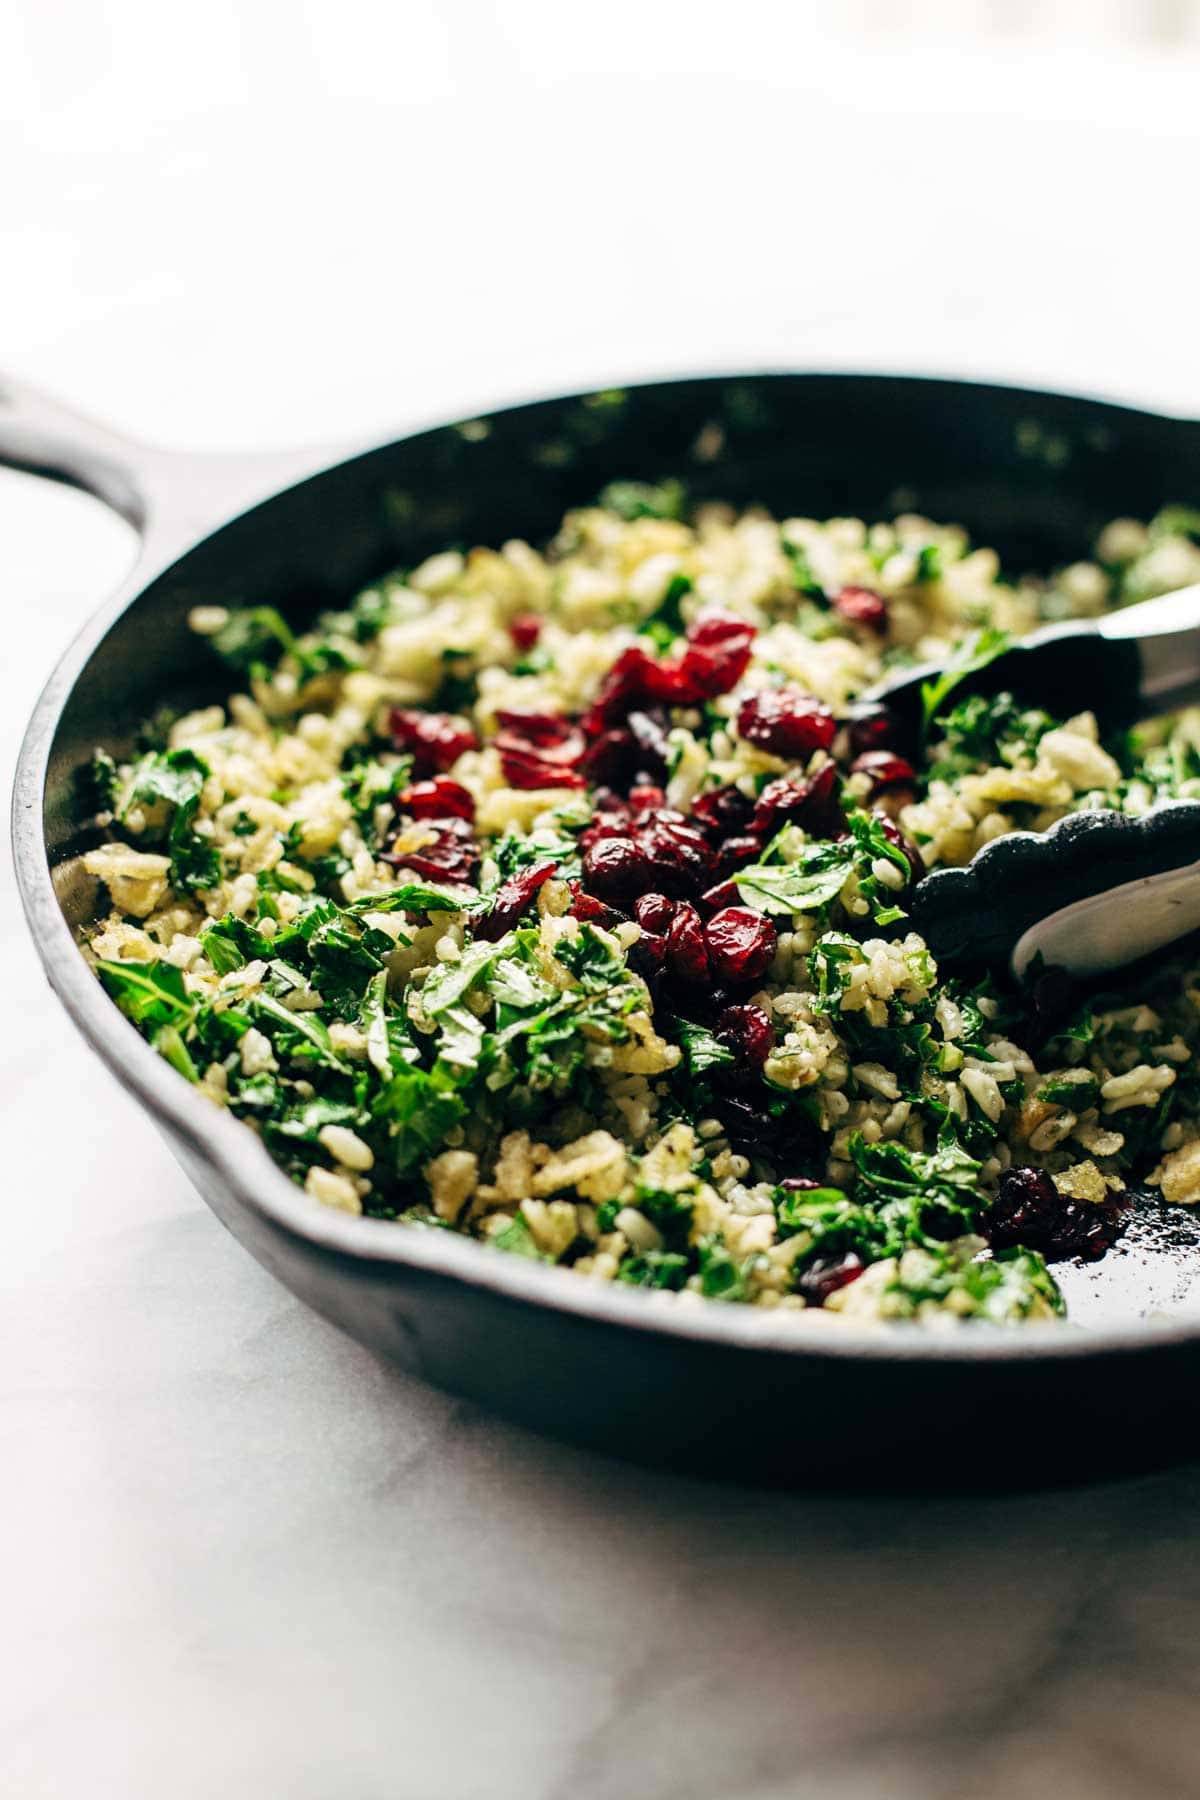 Garlic Kale and Brown Rice Salad with a zippy lemon herb dressing! This side dish recipe is so simple and it compliments almost any main dish! | pinchofyum.com